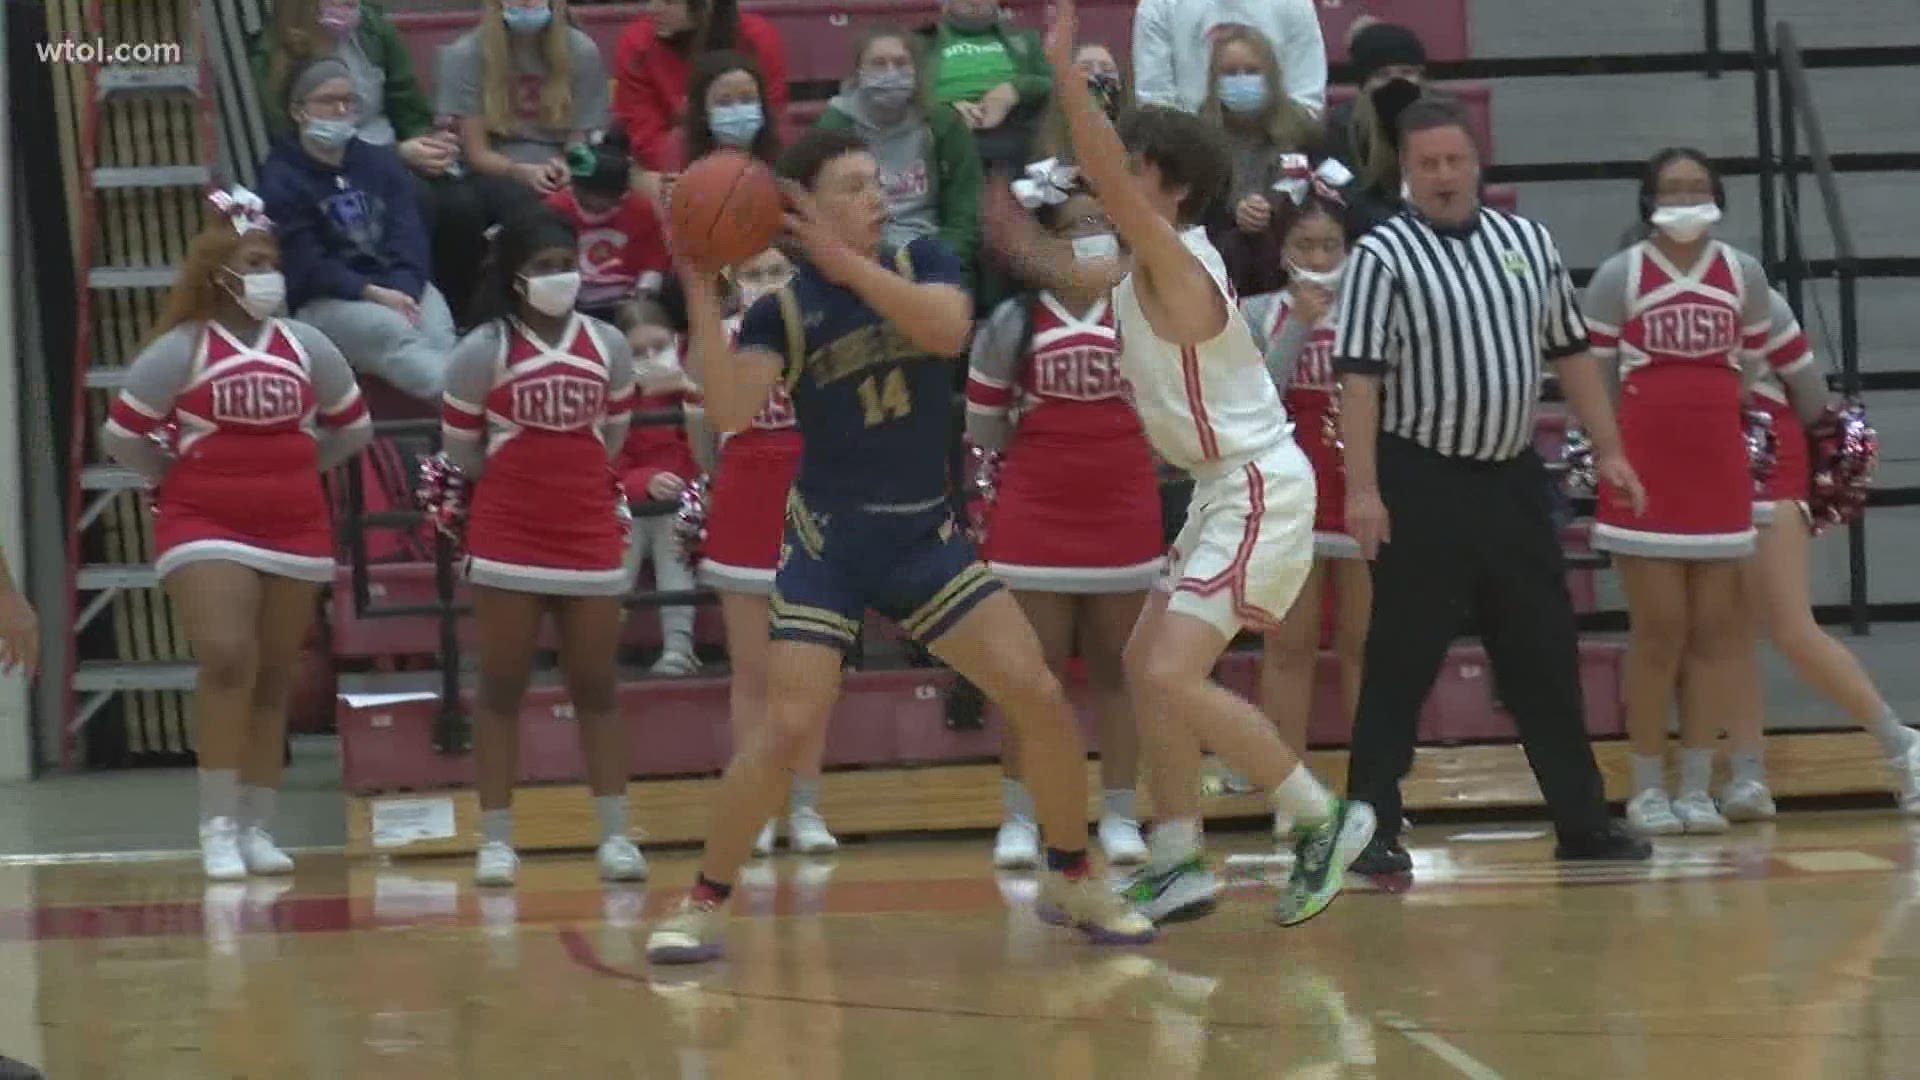 Sports recap featuring boys high school hoops with Perrysburg vs. Northview and St. John's vs. Central Catholic, plus Toledo Rockets improve to 9-1 in men's MAC play